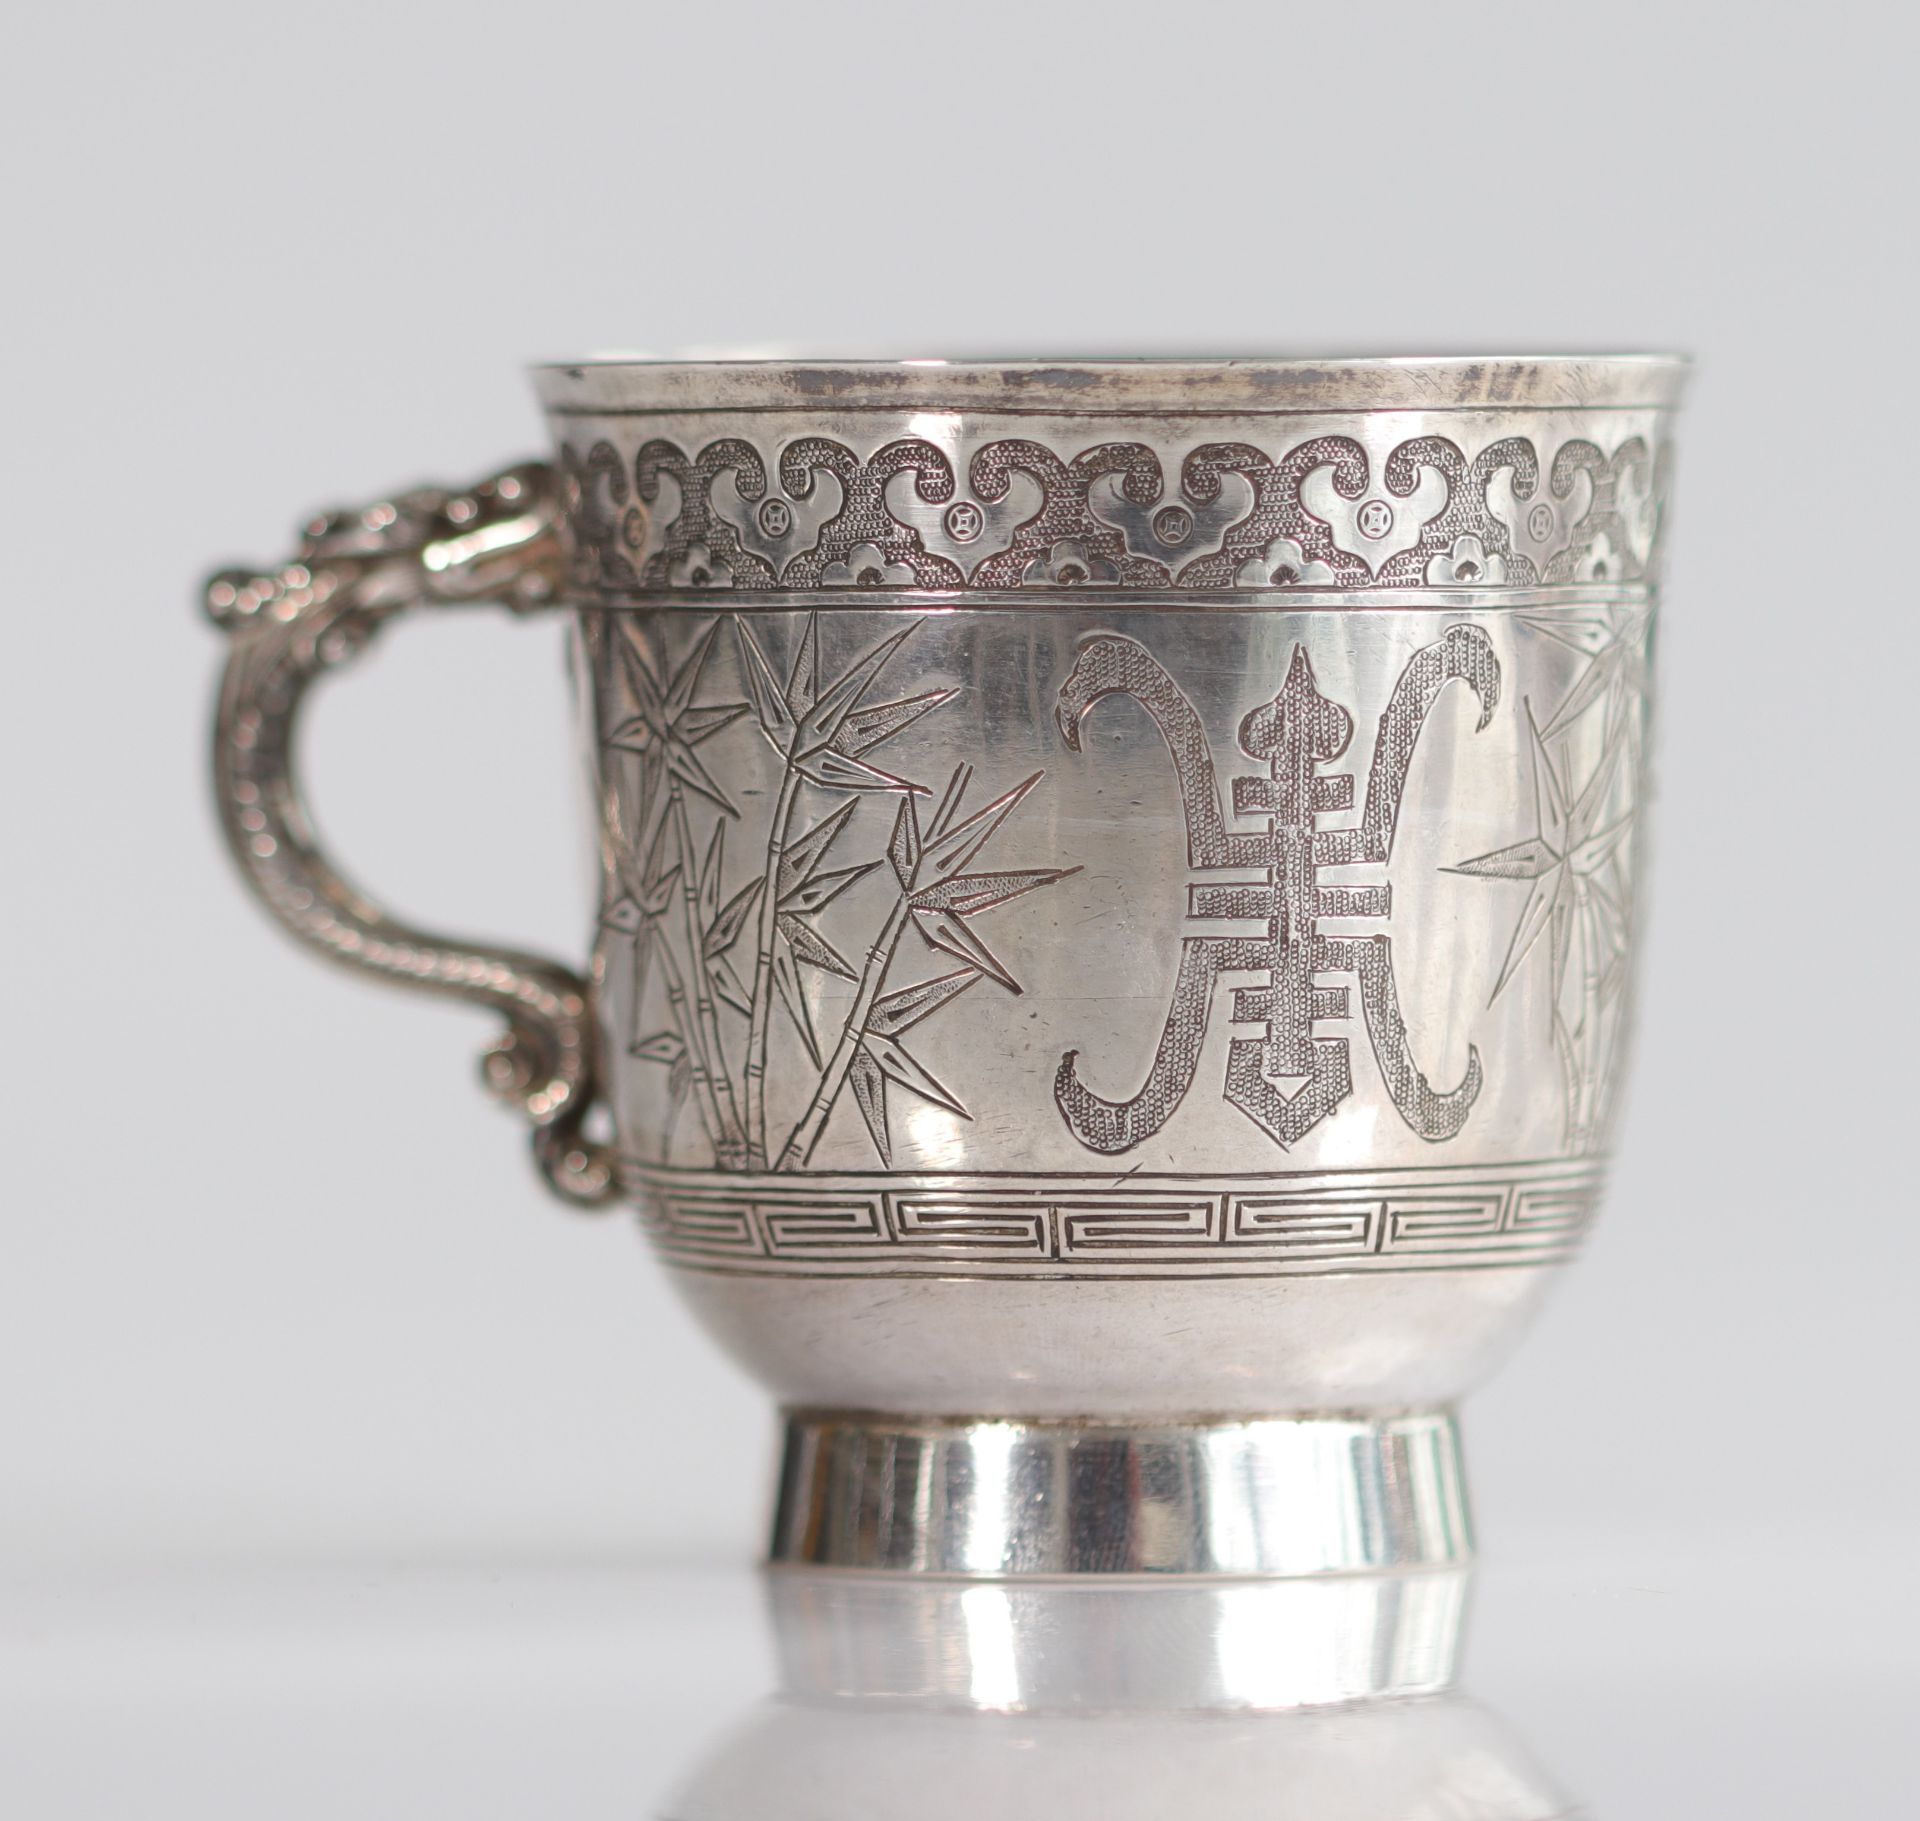 China silver teapot and cup - Image 7 of 11